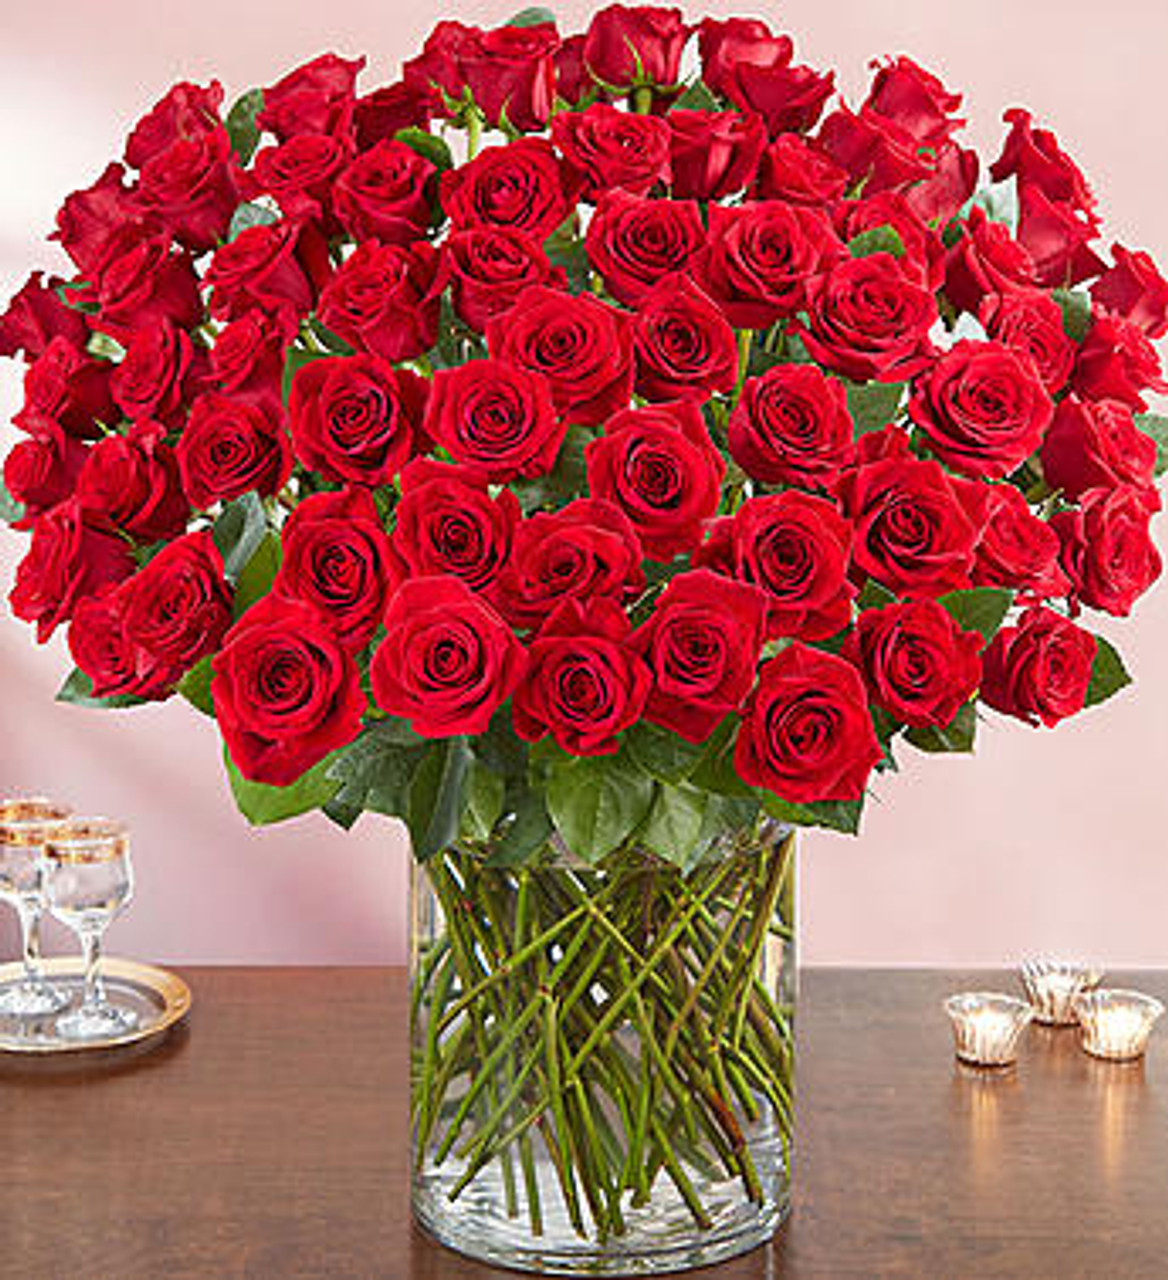 100 Red & White Roses Bouquet